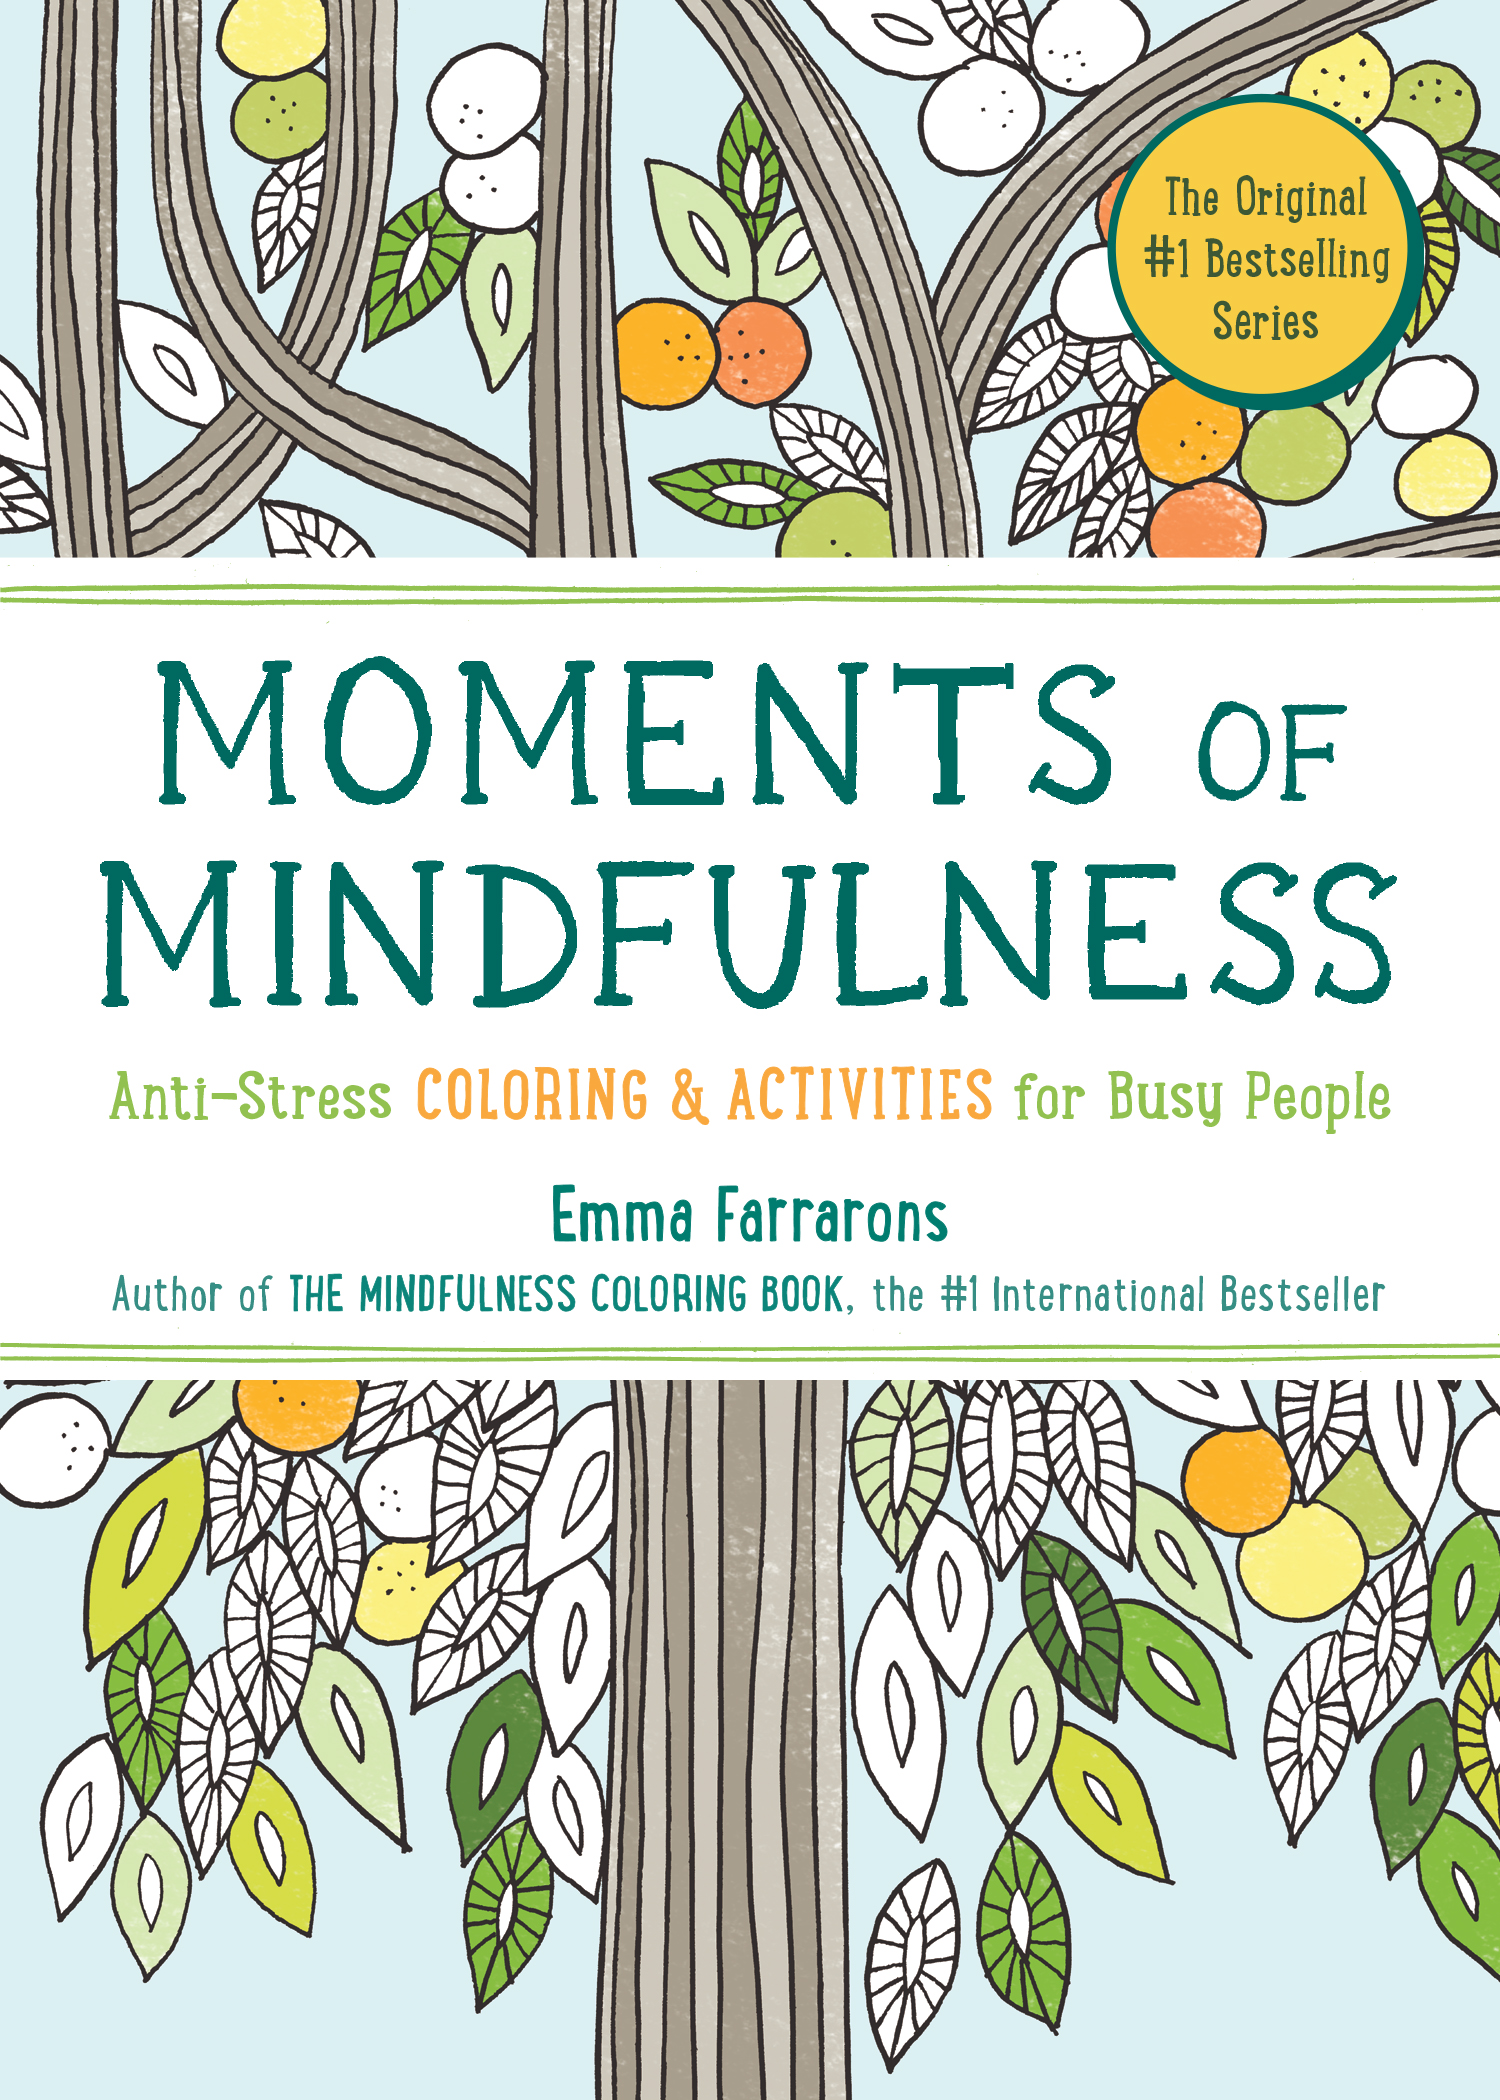 Mindfulness Coloring Book for Adults Volume 2 (2021)